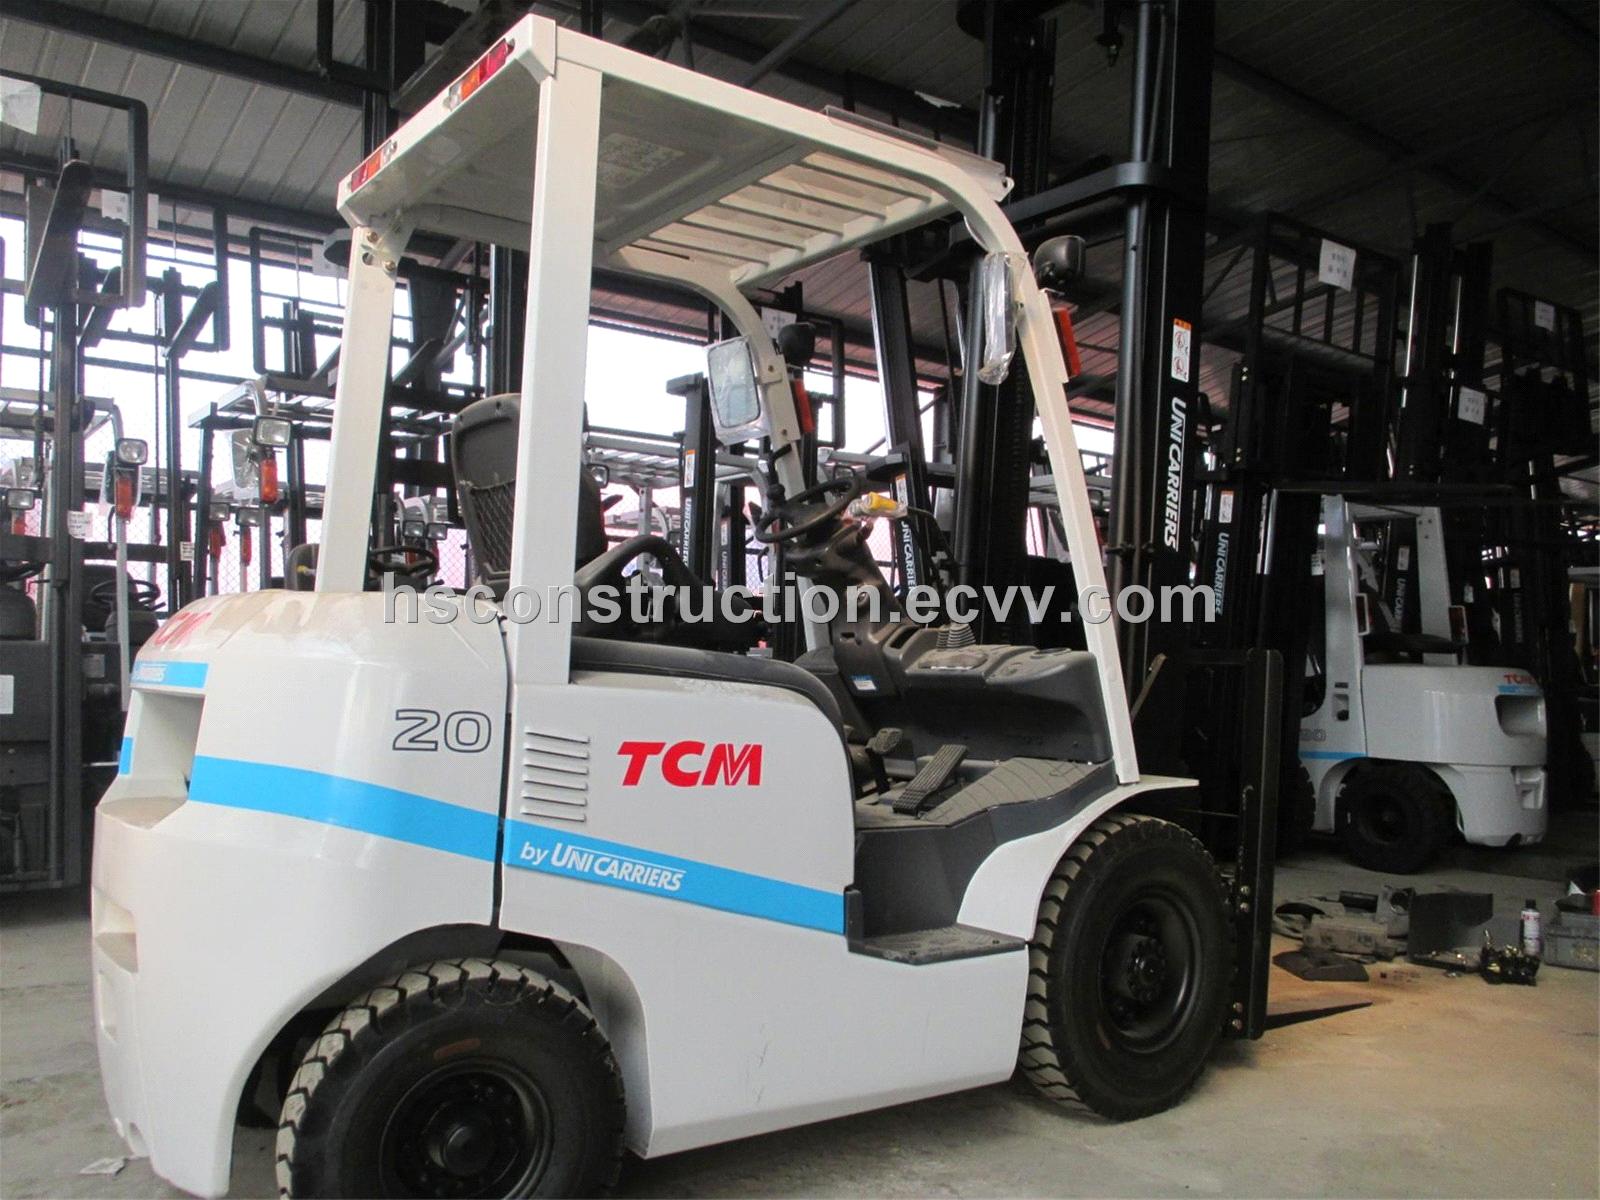 3ton Automatic Diesel Forklift With Isuzu C240 Engine Tcm Forklift From China Manufacturer Manufactory Factory And Supplier On Ecvv Com